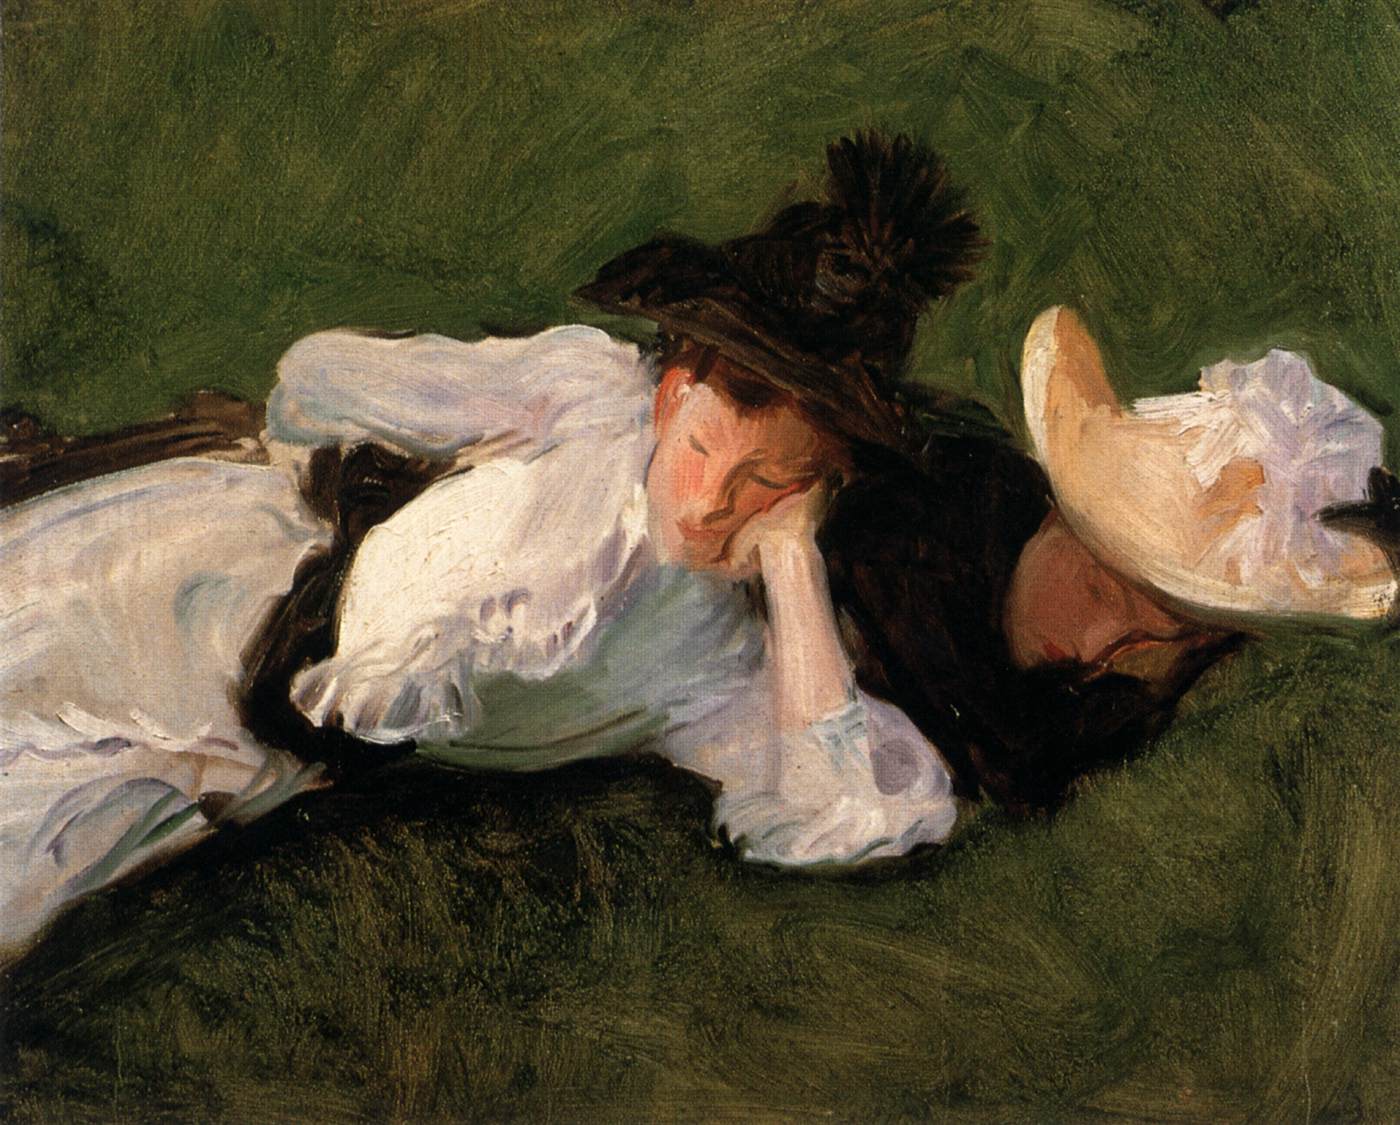 Two Girls on a Lawn